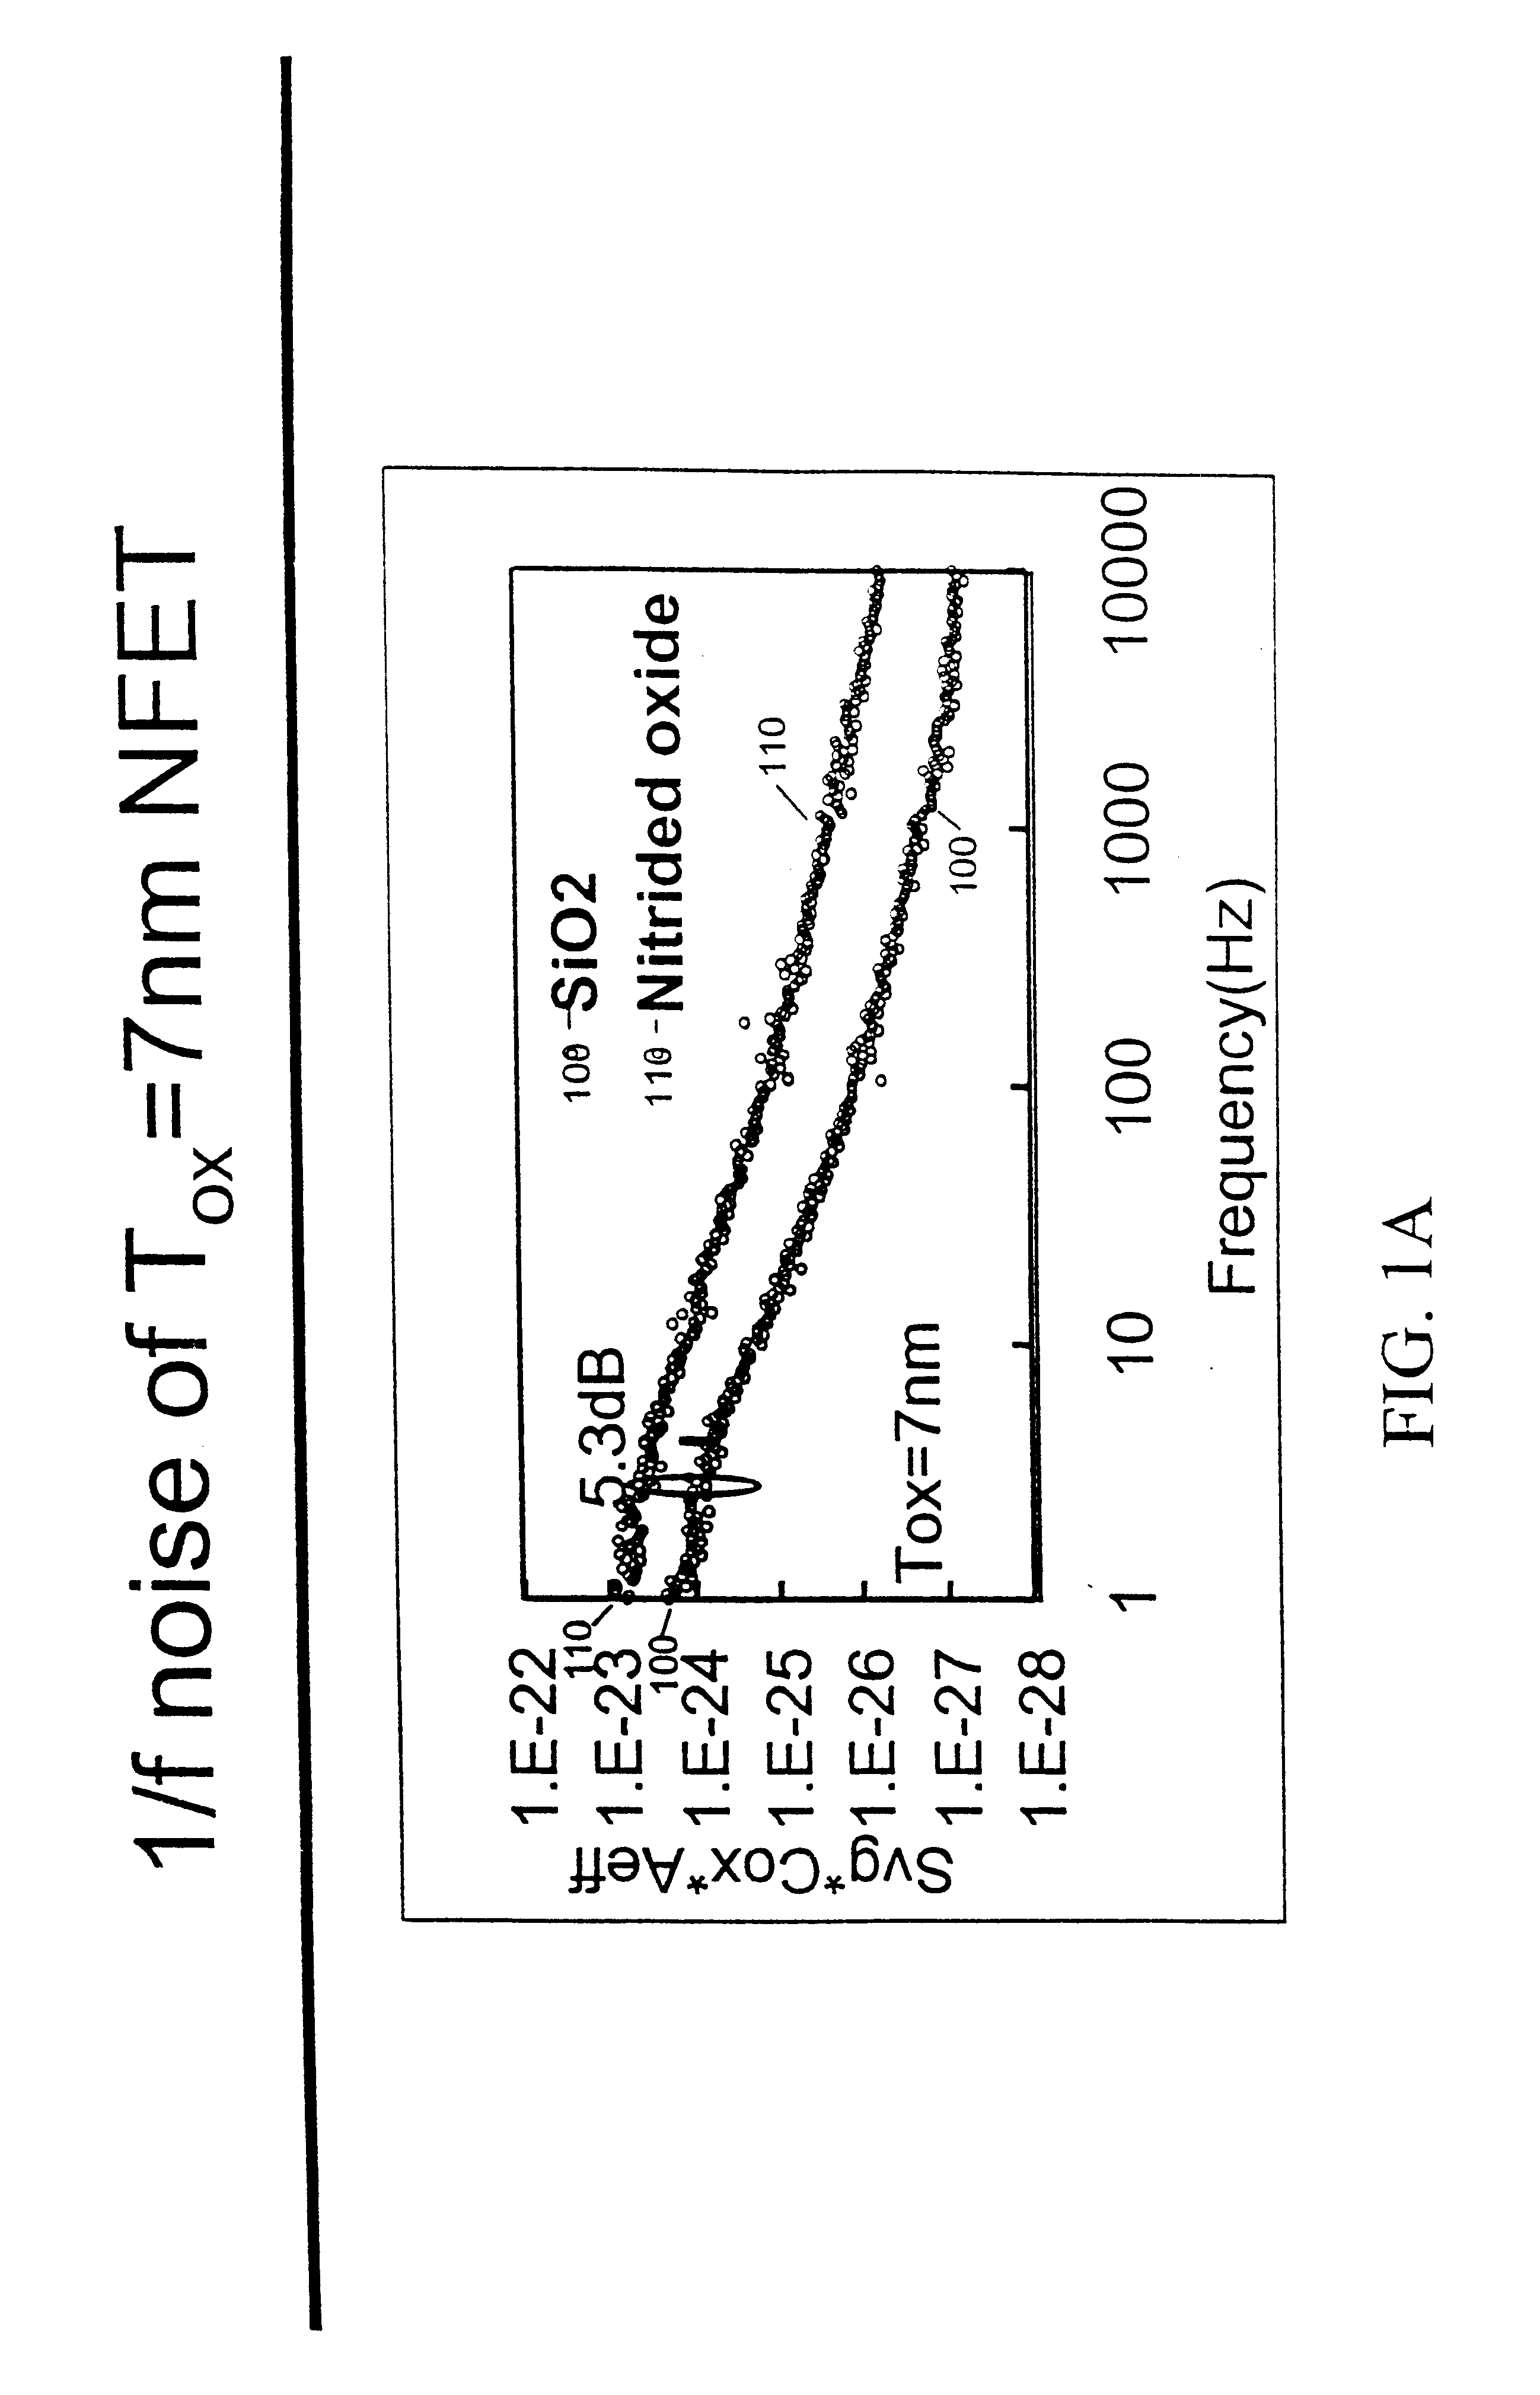 Reduced 1/f noise in MOSFETs